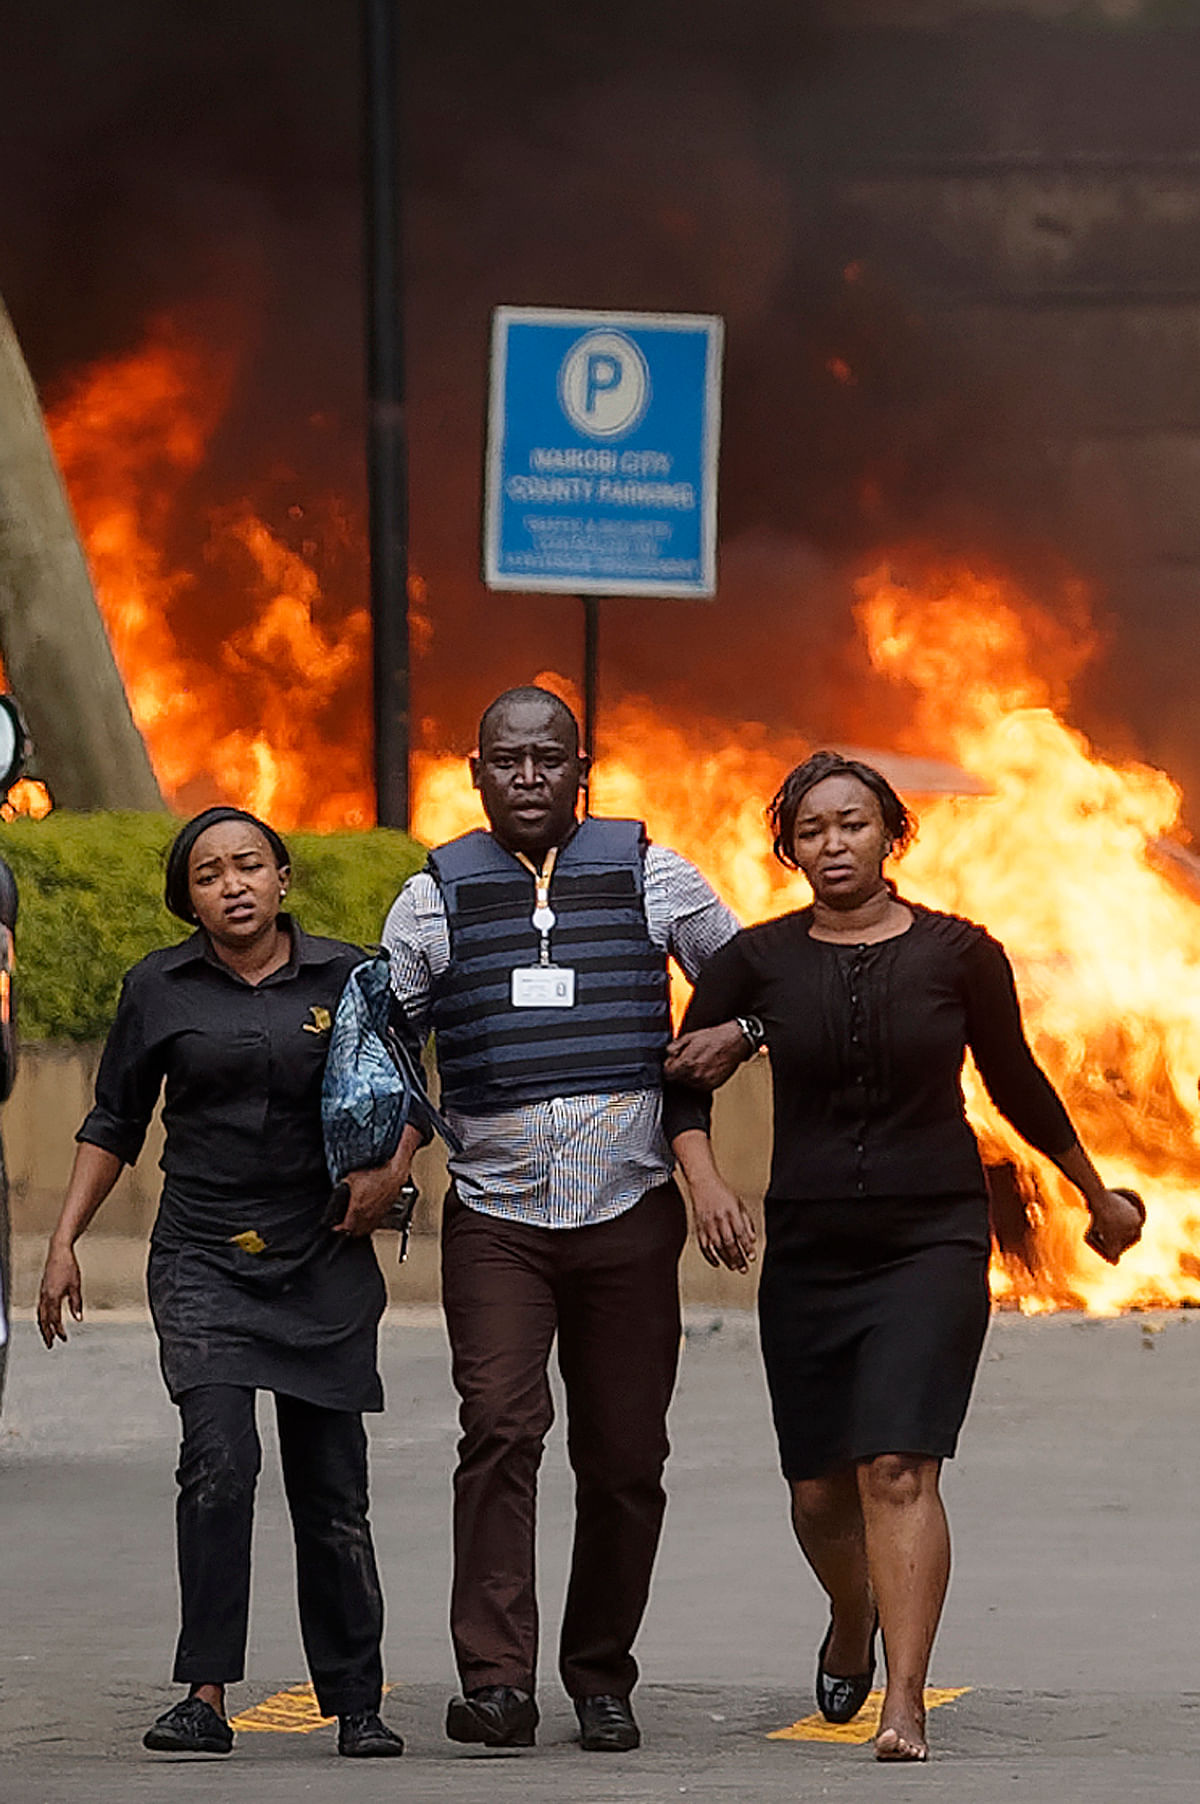 Extremists stormed a luxury hotel in Nairobi, Kenya, setting off explosions and gunning down people at cafe tables. 